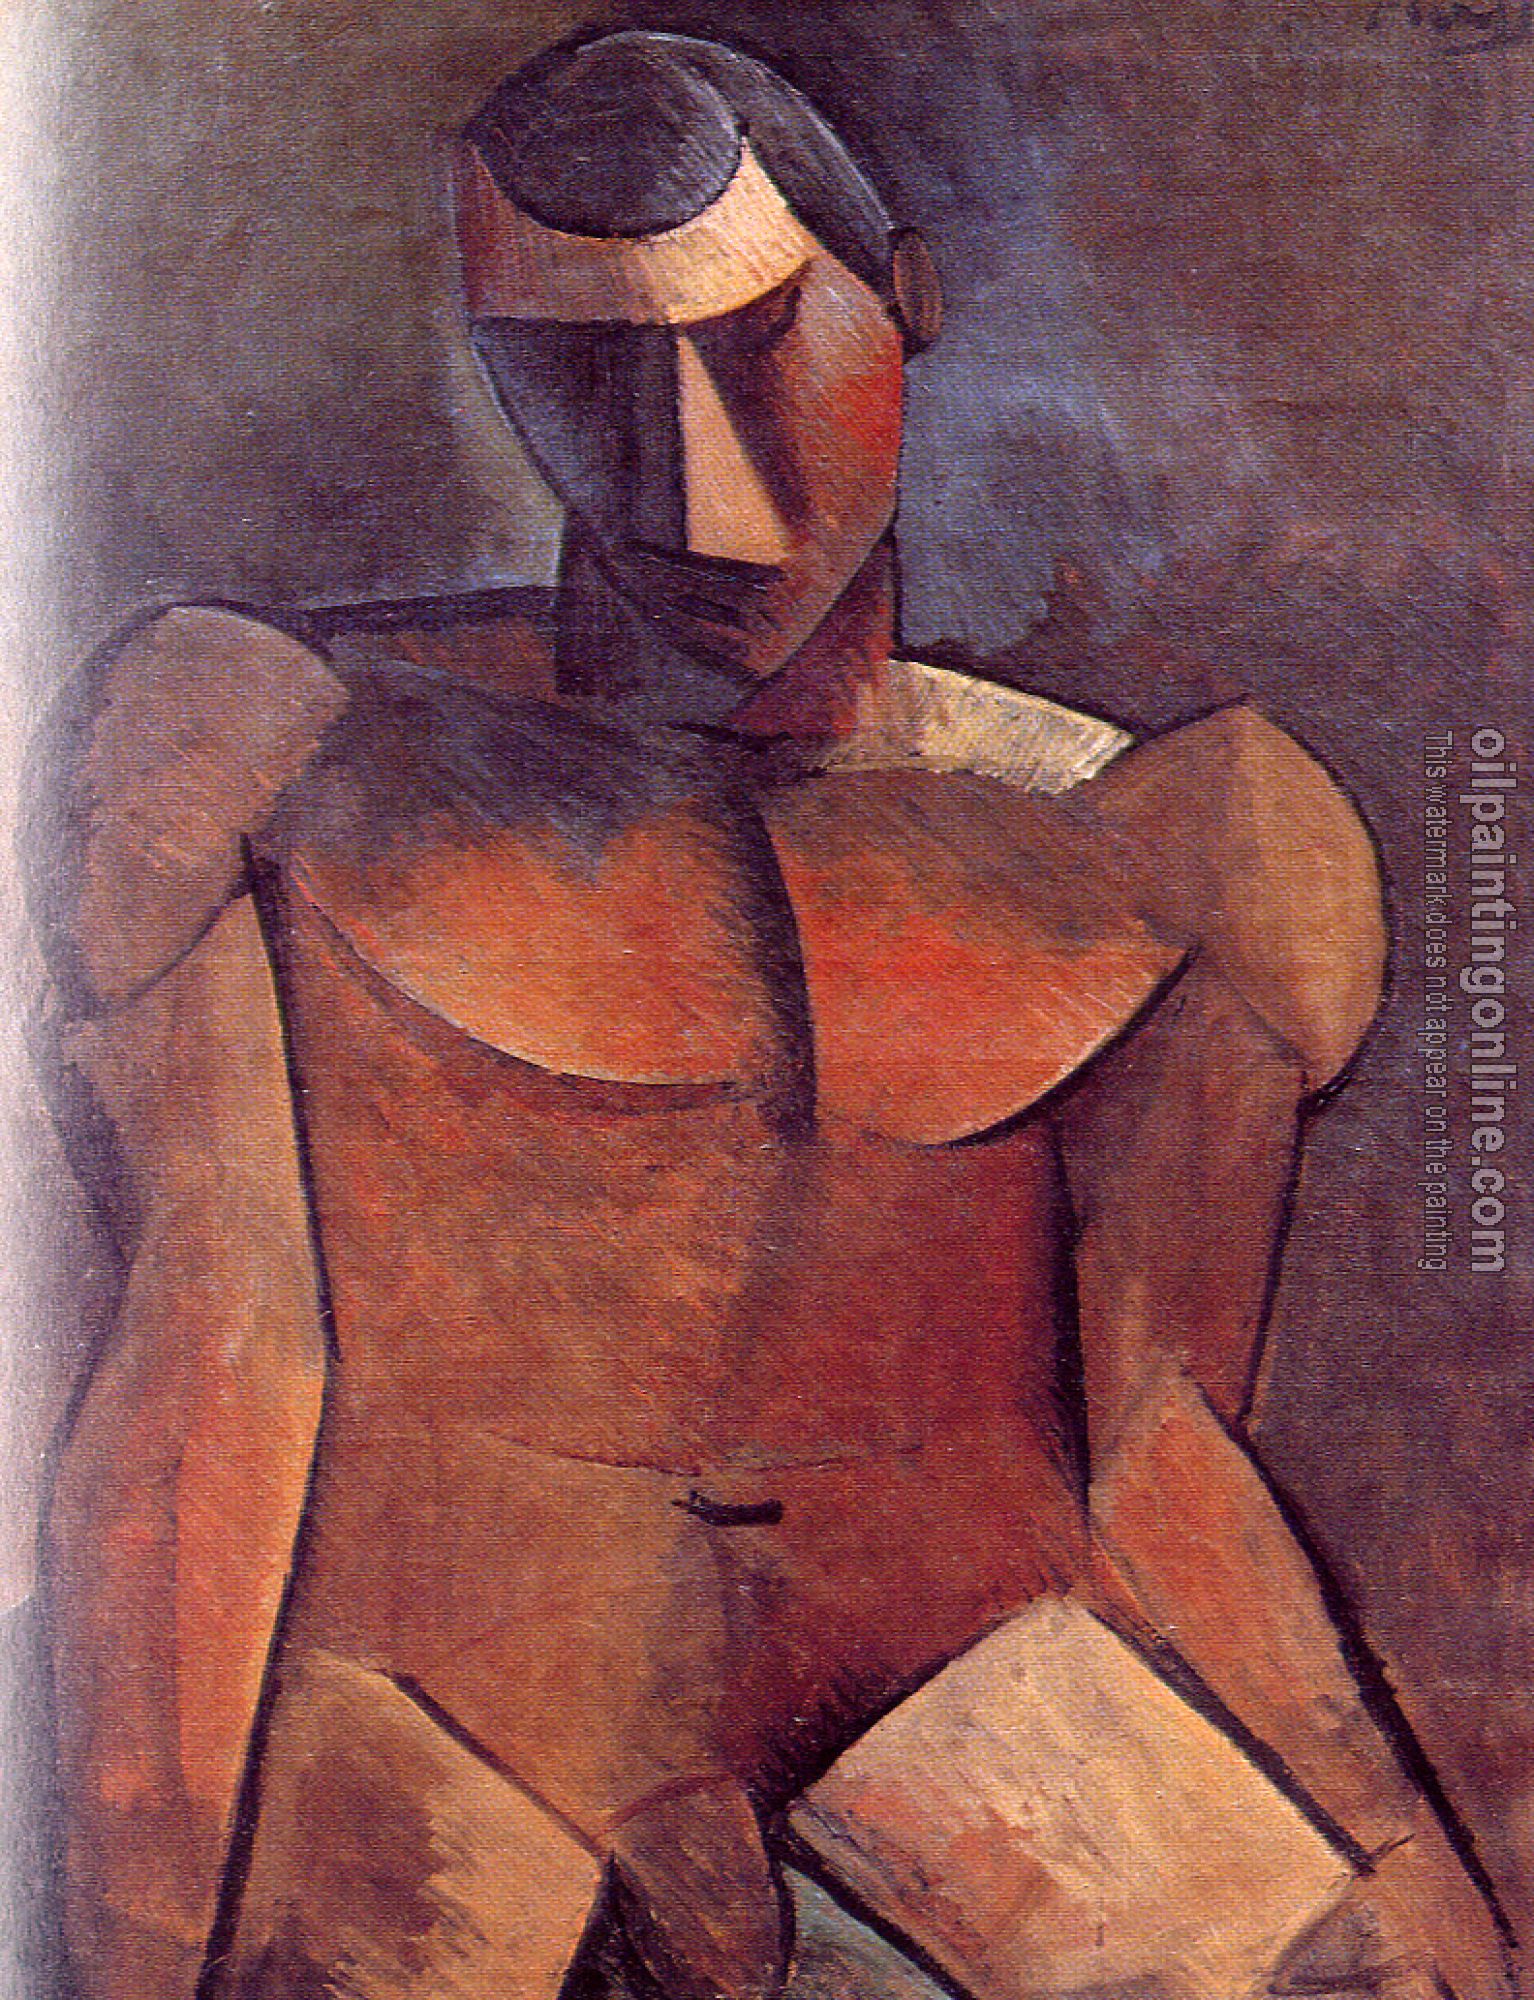 Picasso, Pablo - seated male nude